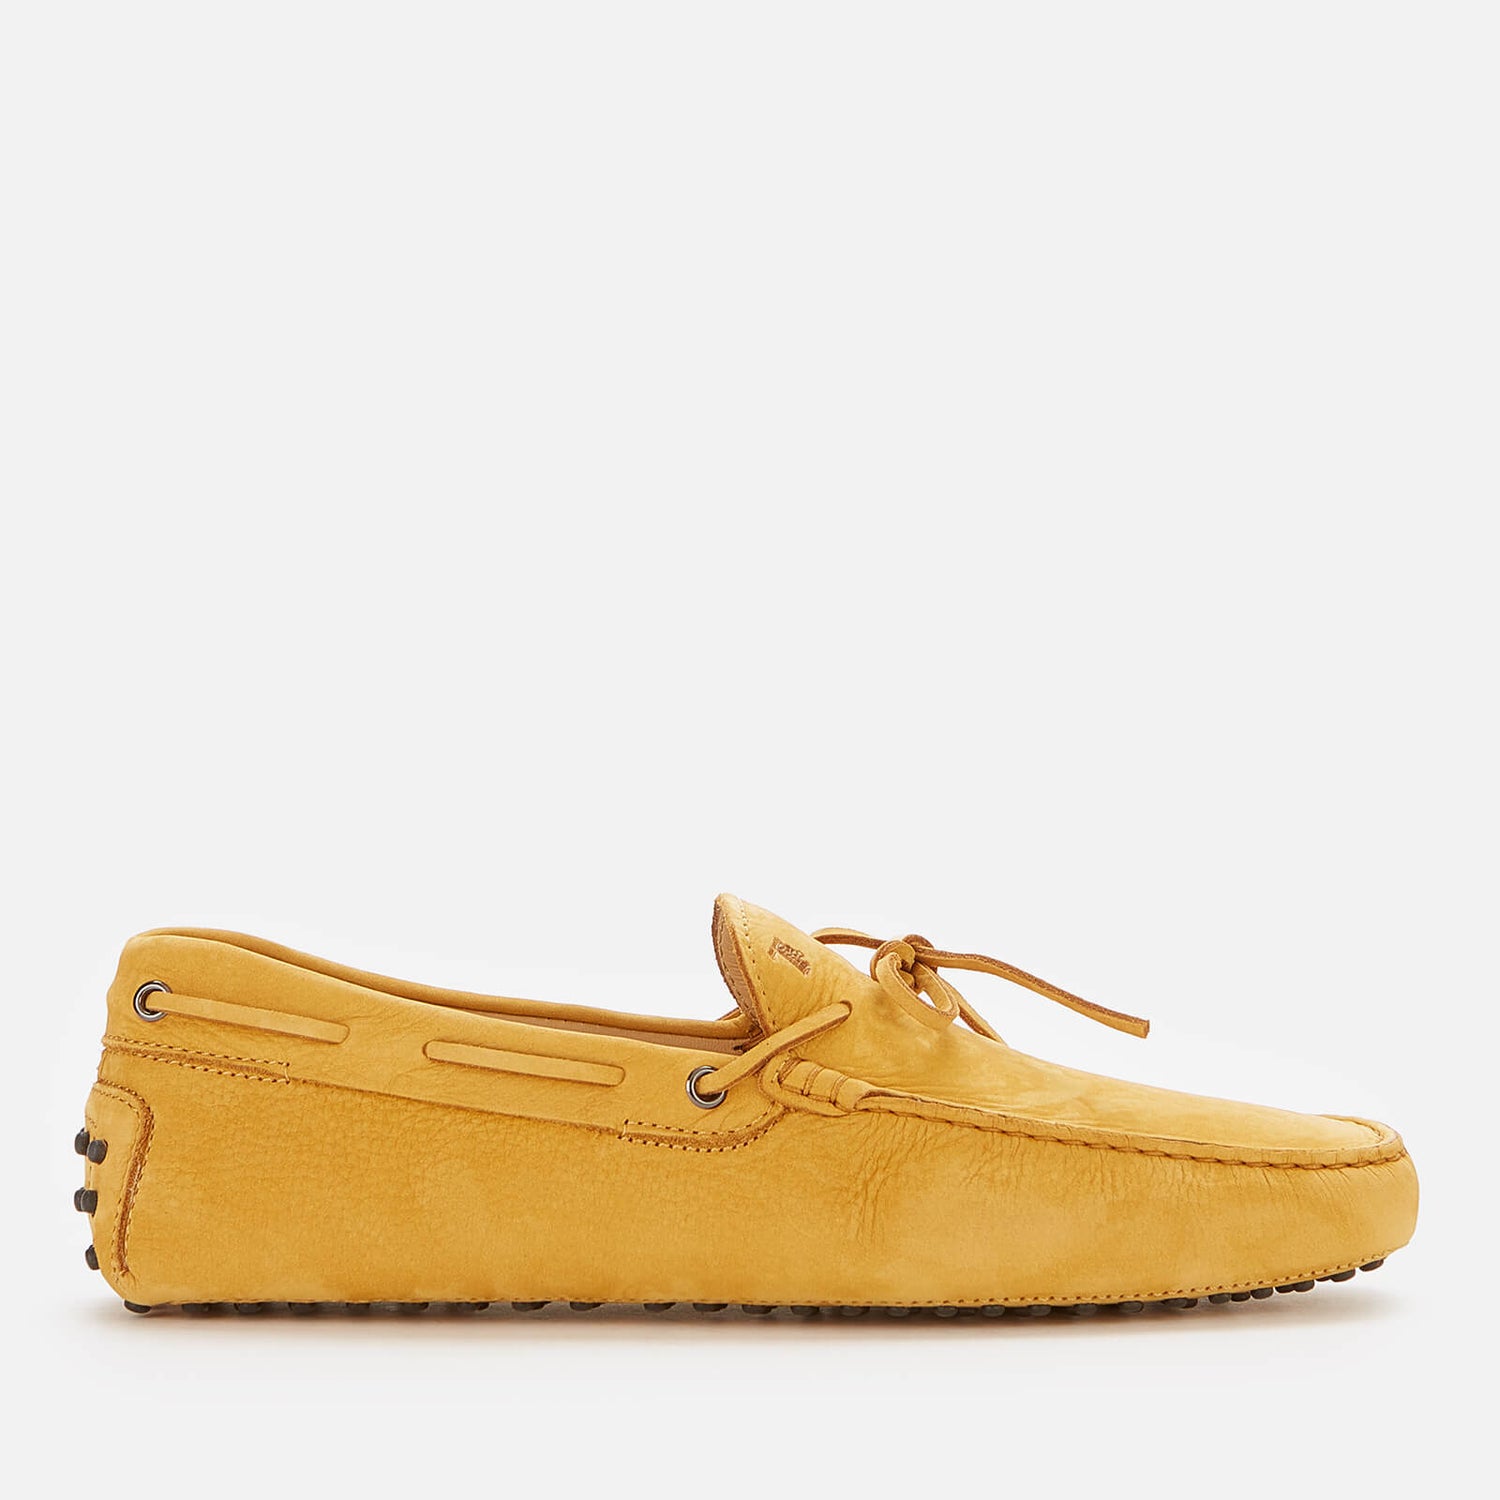 Tod's Men's Gommino Suede Driving Shoes - Yellow - UK 7